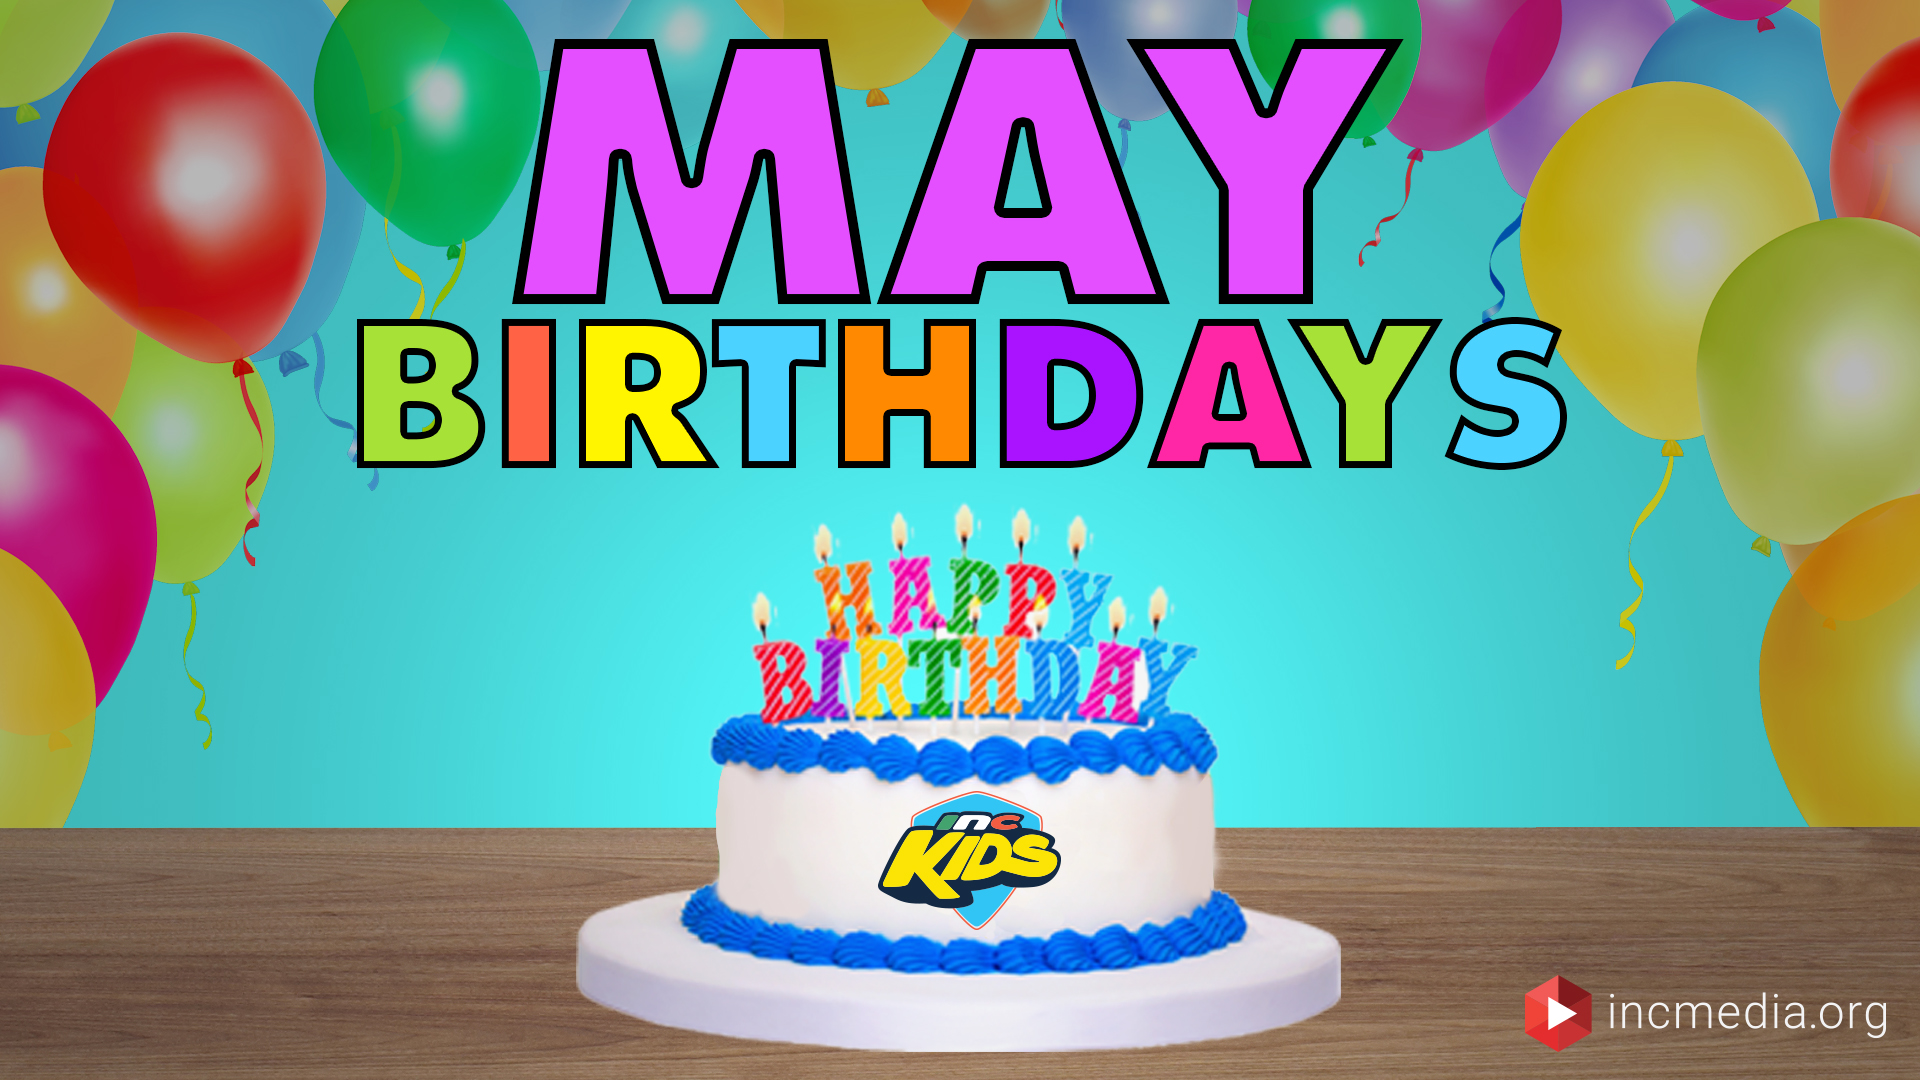 Who has a birthday in May?